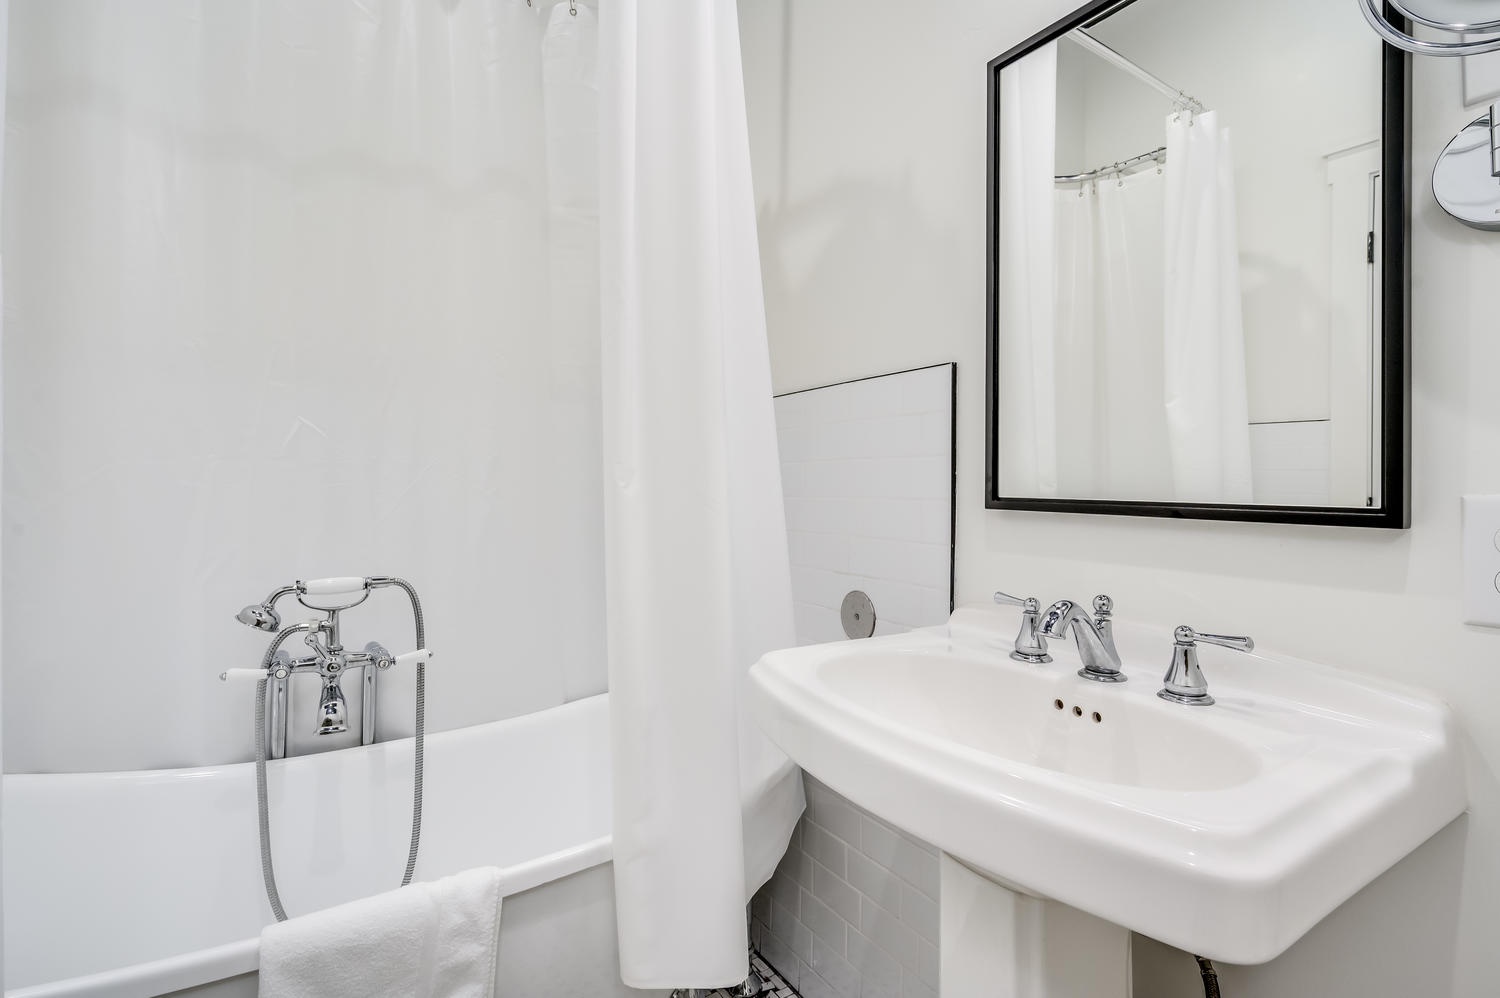 Suite 101 – The chic En Suite Bathroom offers a pedestal sink with makeup mirror and luxurious Claw-Foot Tub